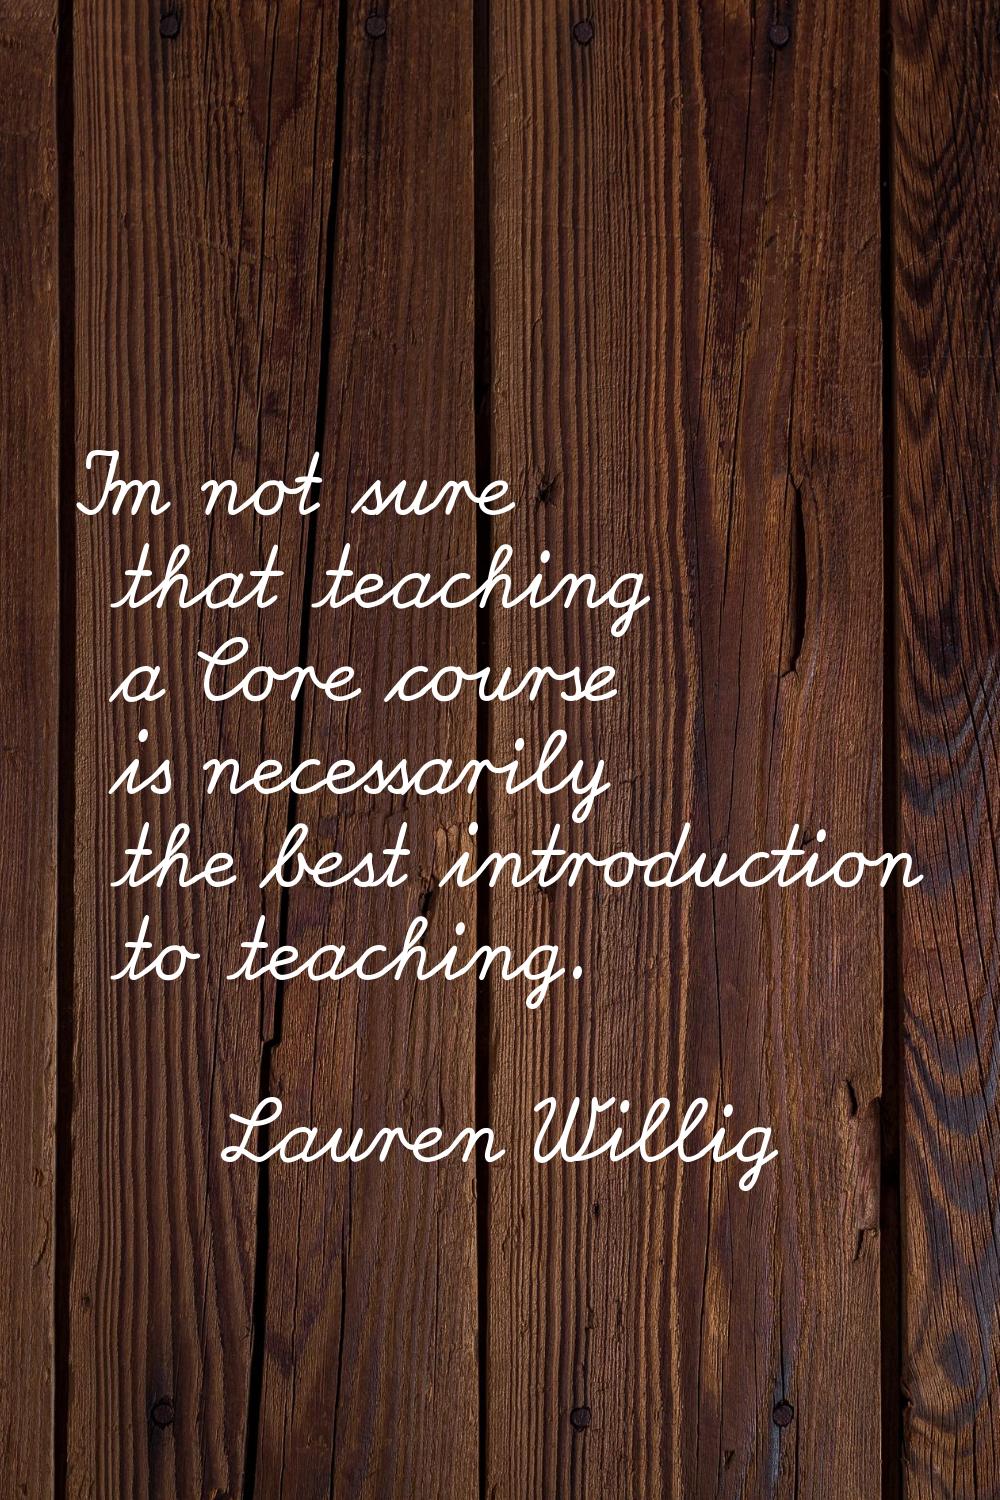 I'm not sure that teaching a Core course is necessarily the best introduction to teaching.